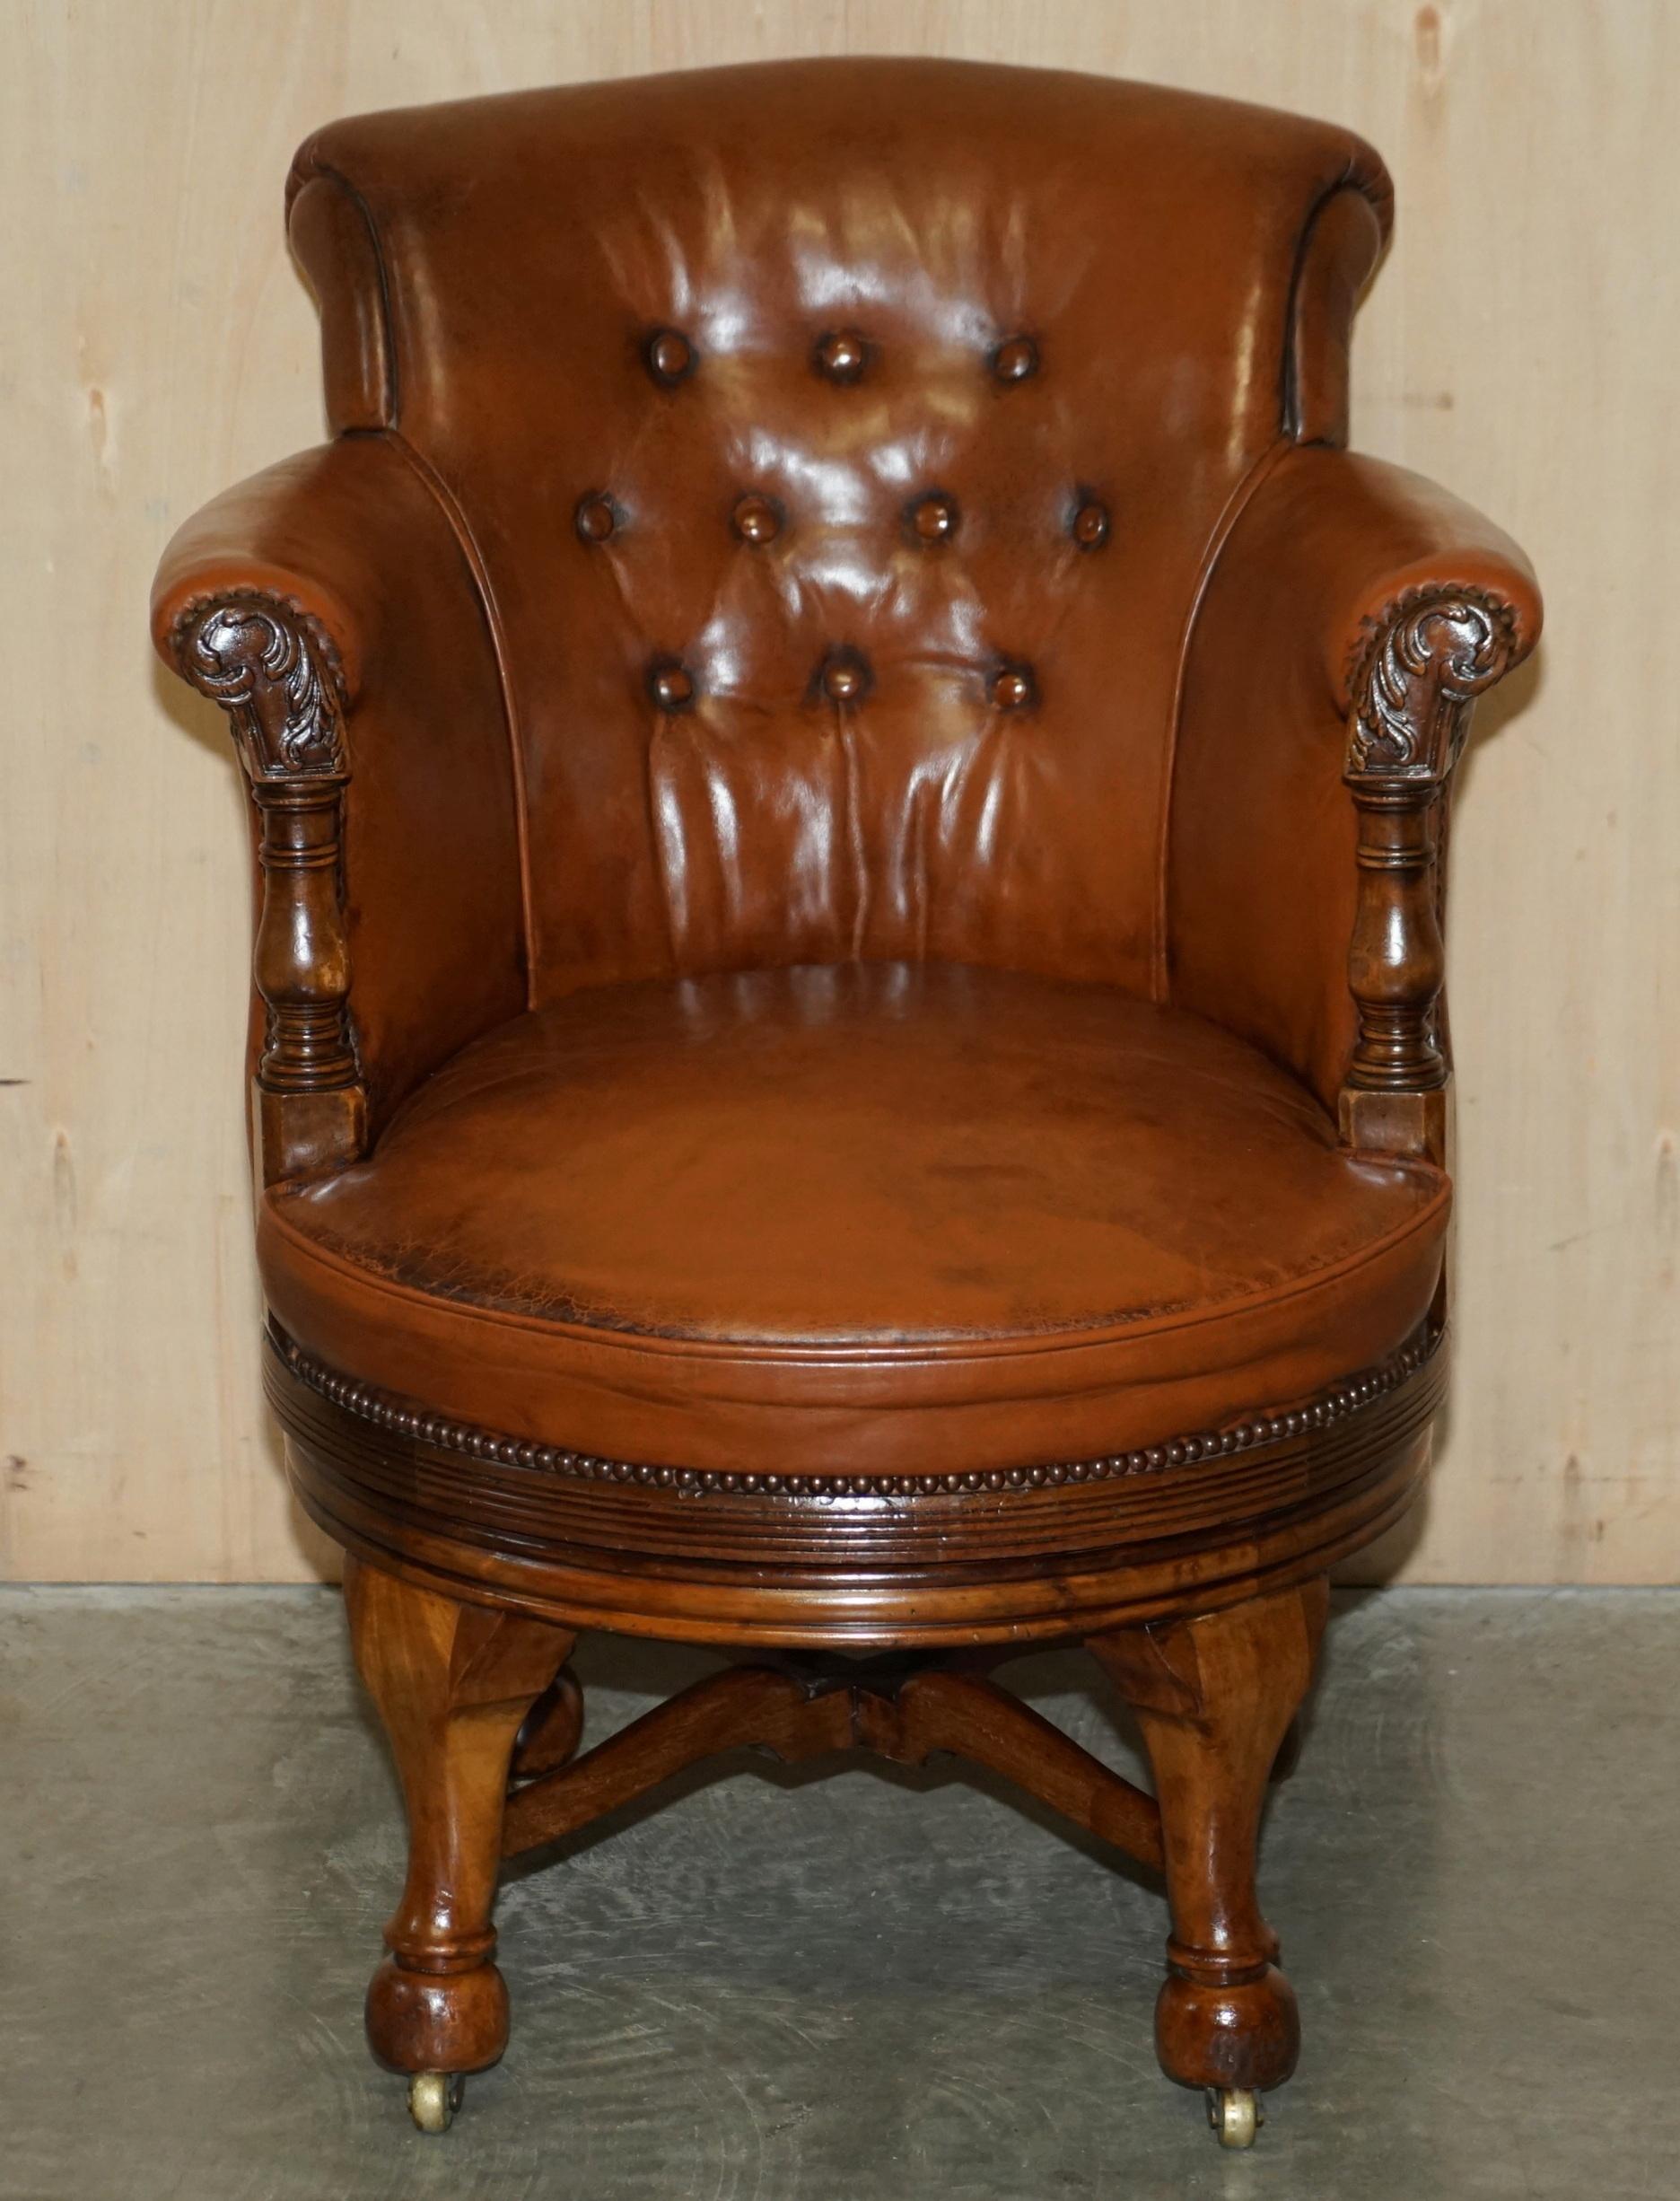 We are delighted to offer for sale this rare circa 1860 Barrell back Chesterfield hand dyed brown leather office chair.

This chair is really quite exquisite, it’s one of the earliest types of swivel chairs I have ever seen, the frame is solid